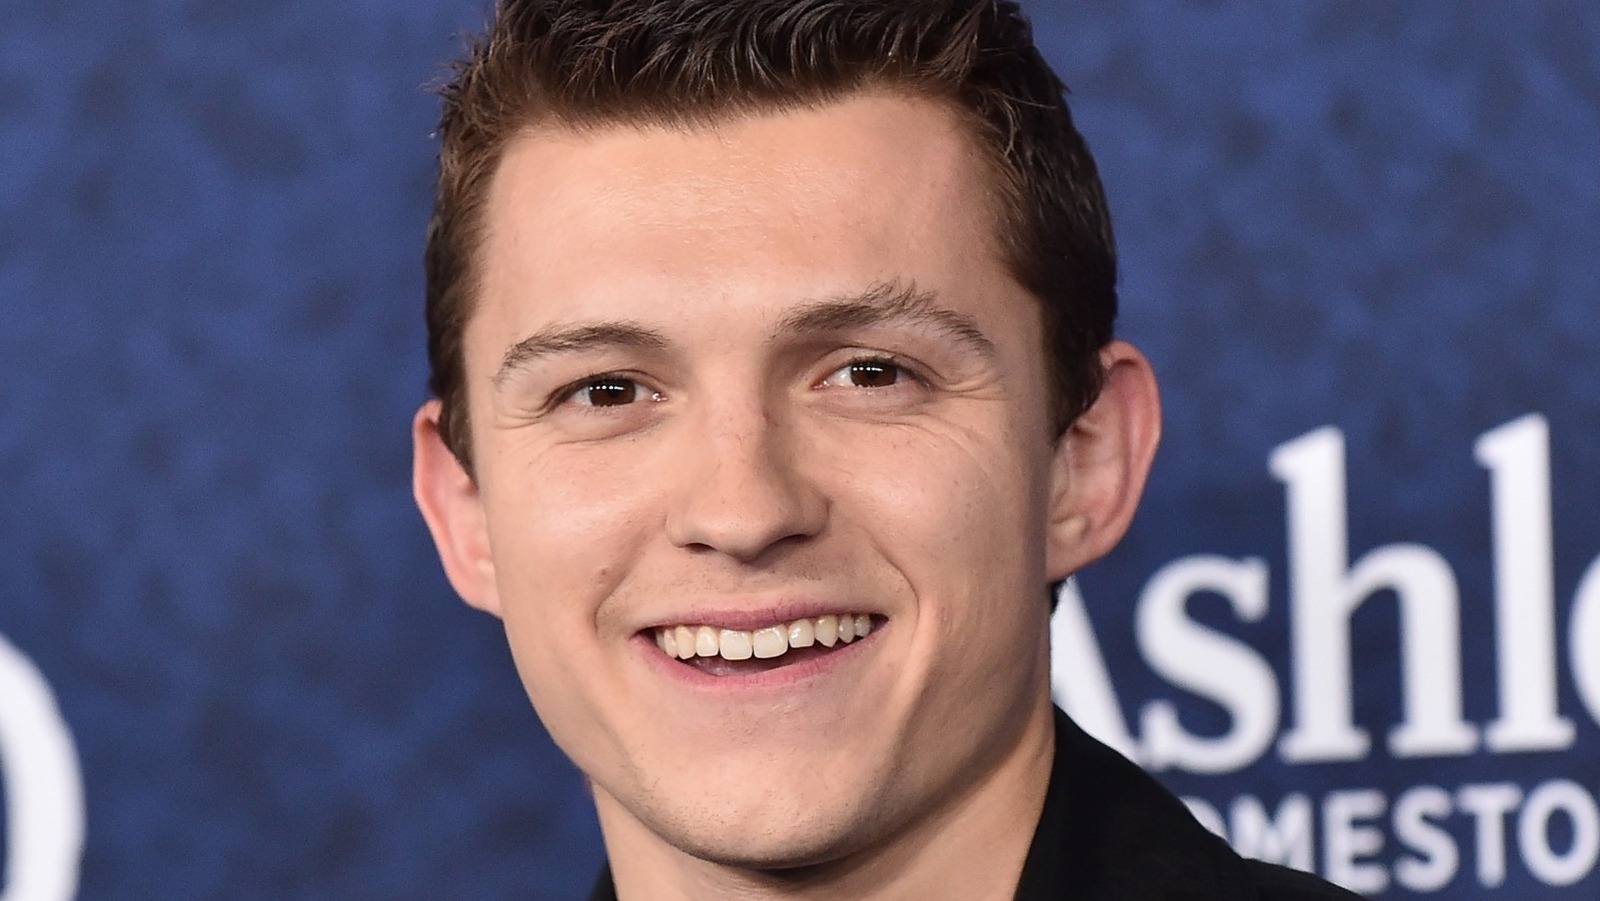 Spider-Man Star Tom Holland Will Play Young Nathan Drake in The